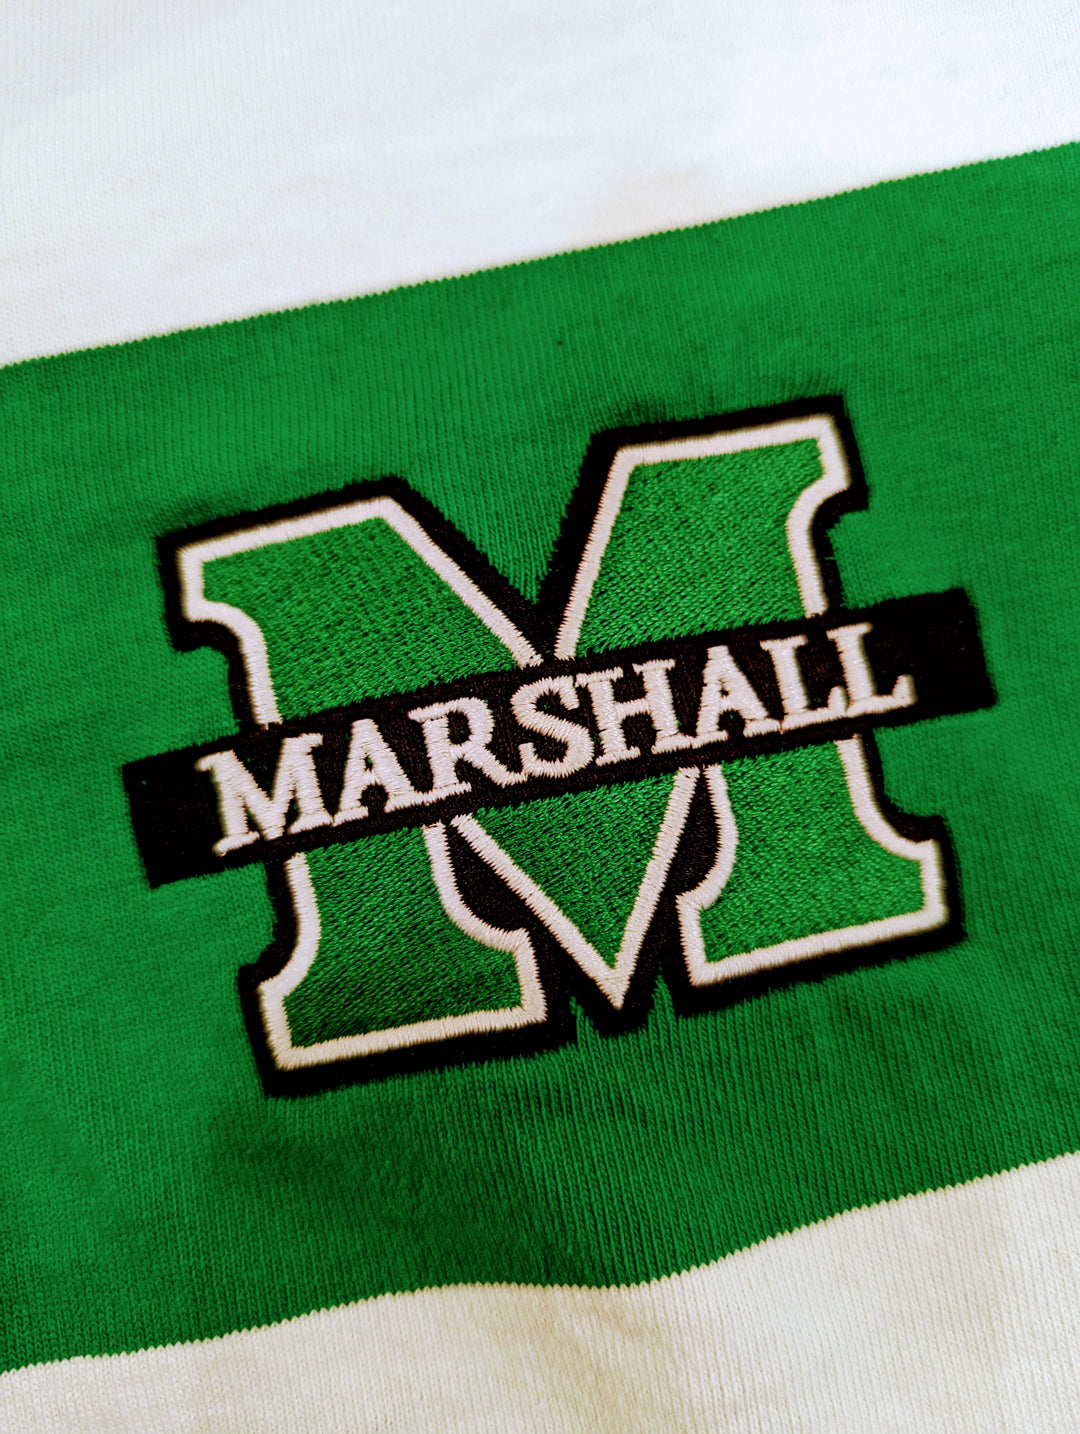 Marshall University Casual Rugby Jersey